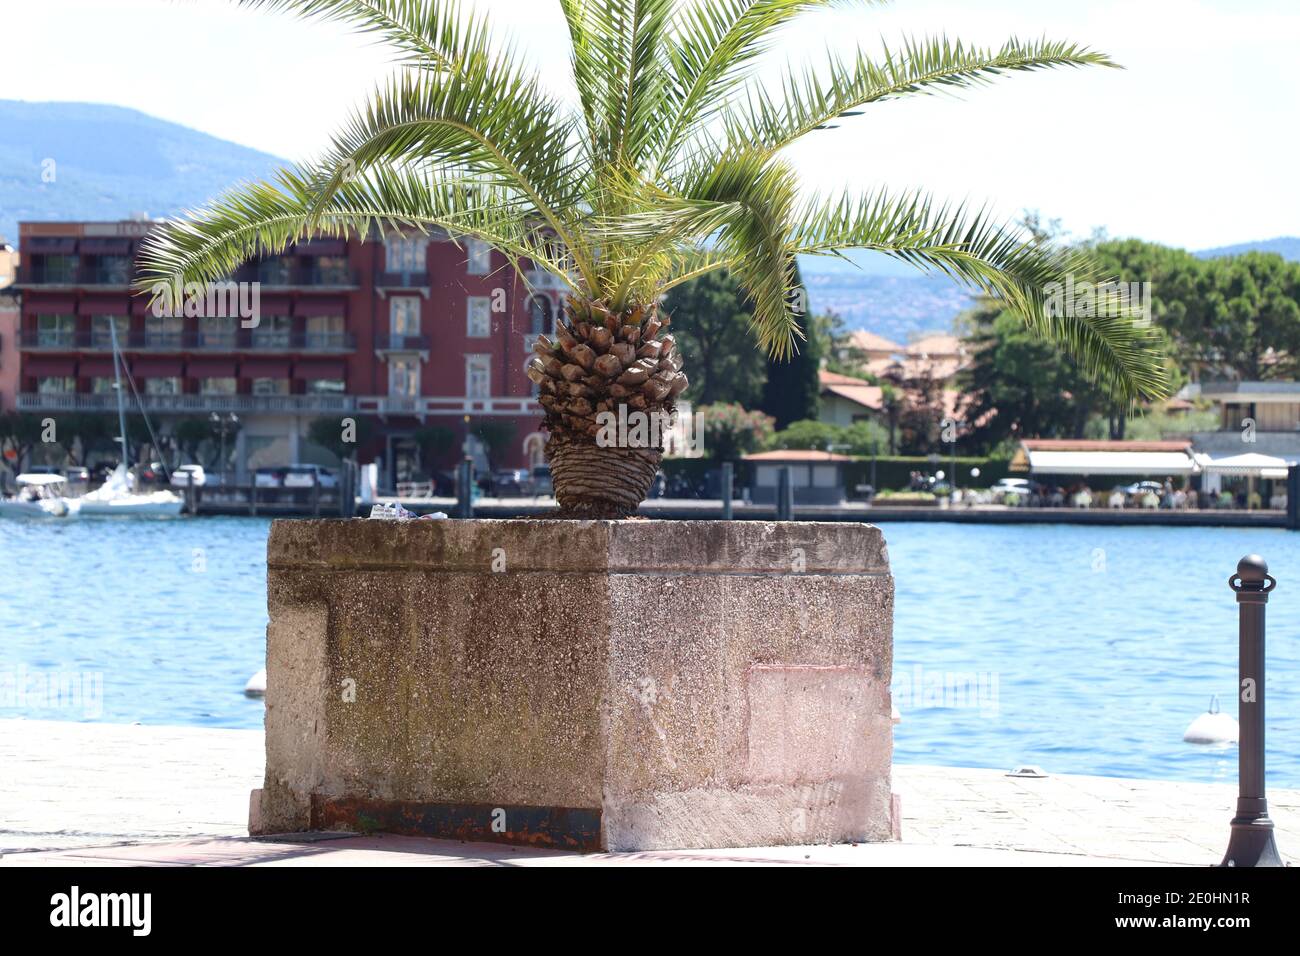 Green alley of growing palm trees on Garda lake, Italy Stock Photo